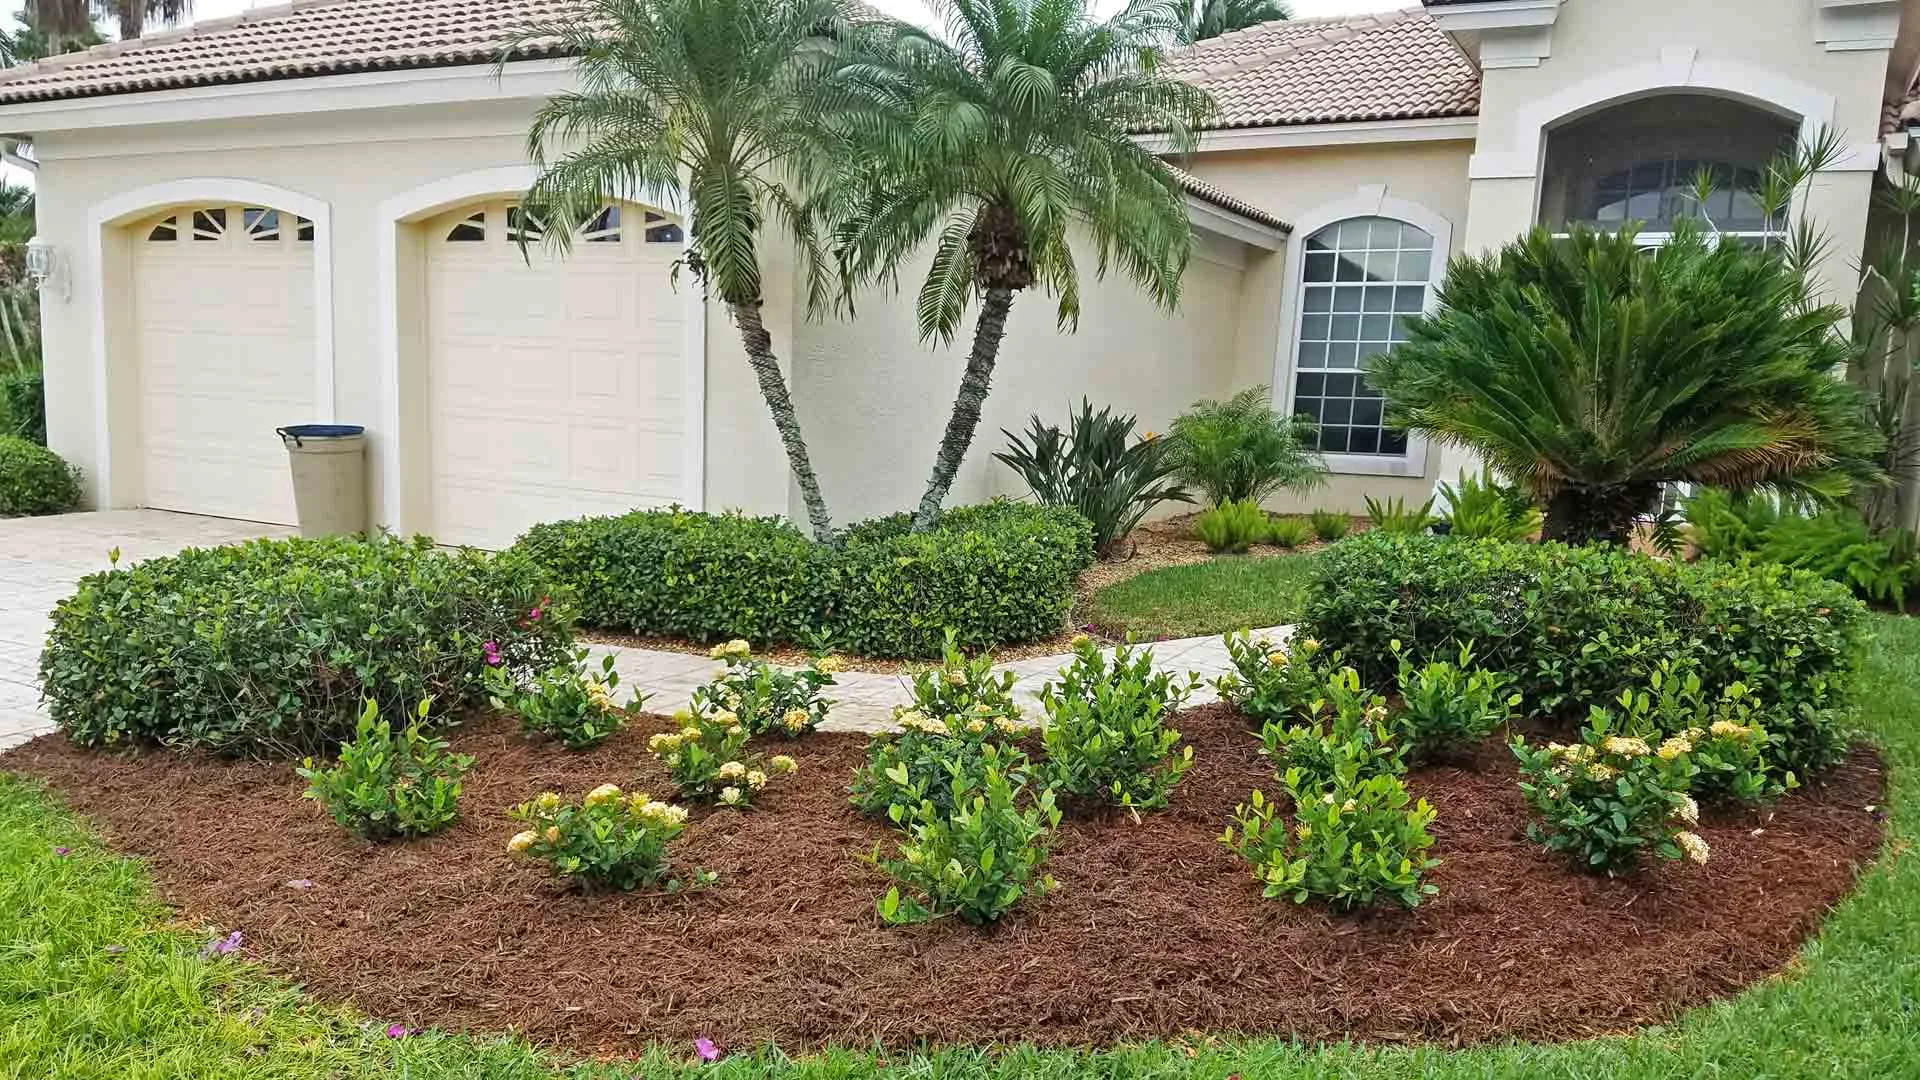 Professional landscaping design and installation by Sunman's Nursery in Fort Myers, FL.